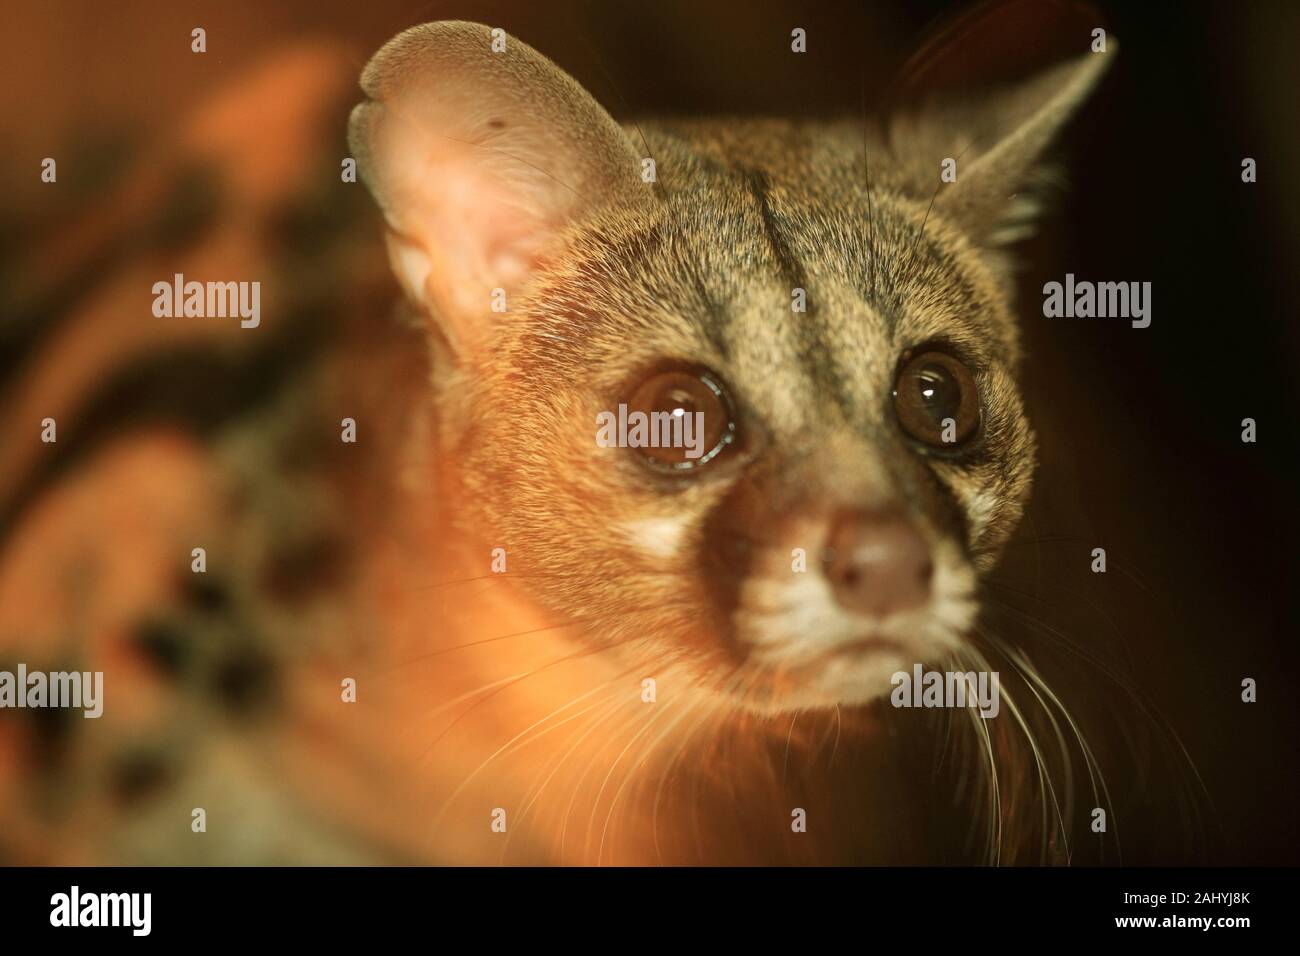 Genet cats come out after dark to find food. Stock Photo